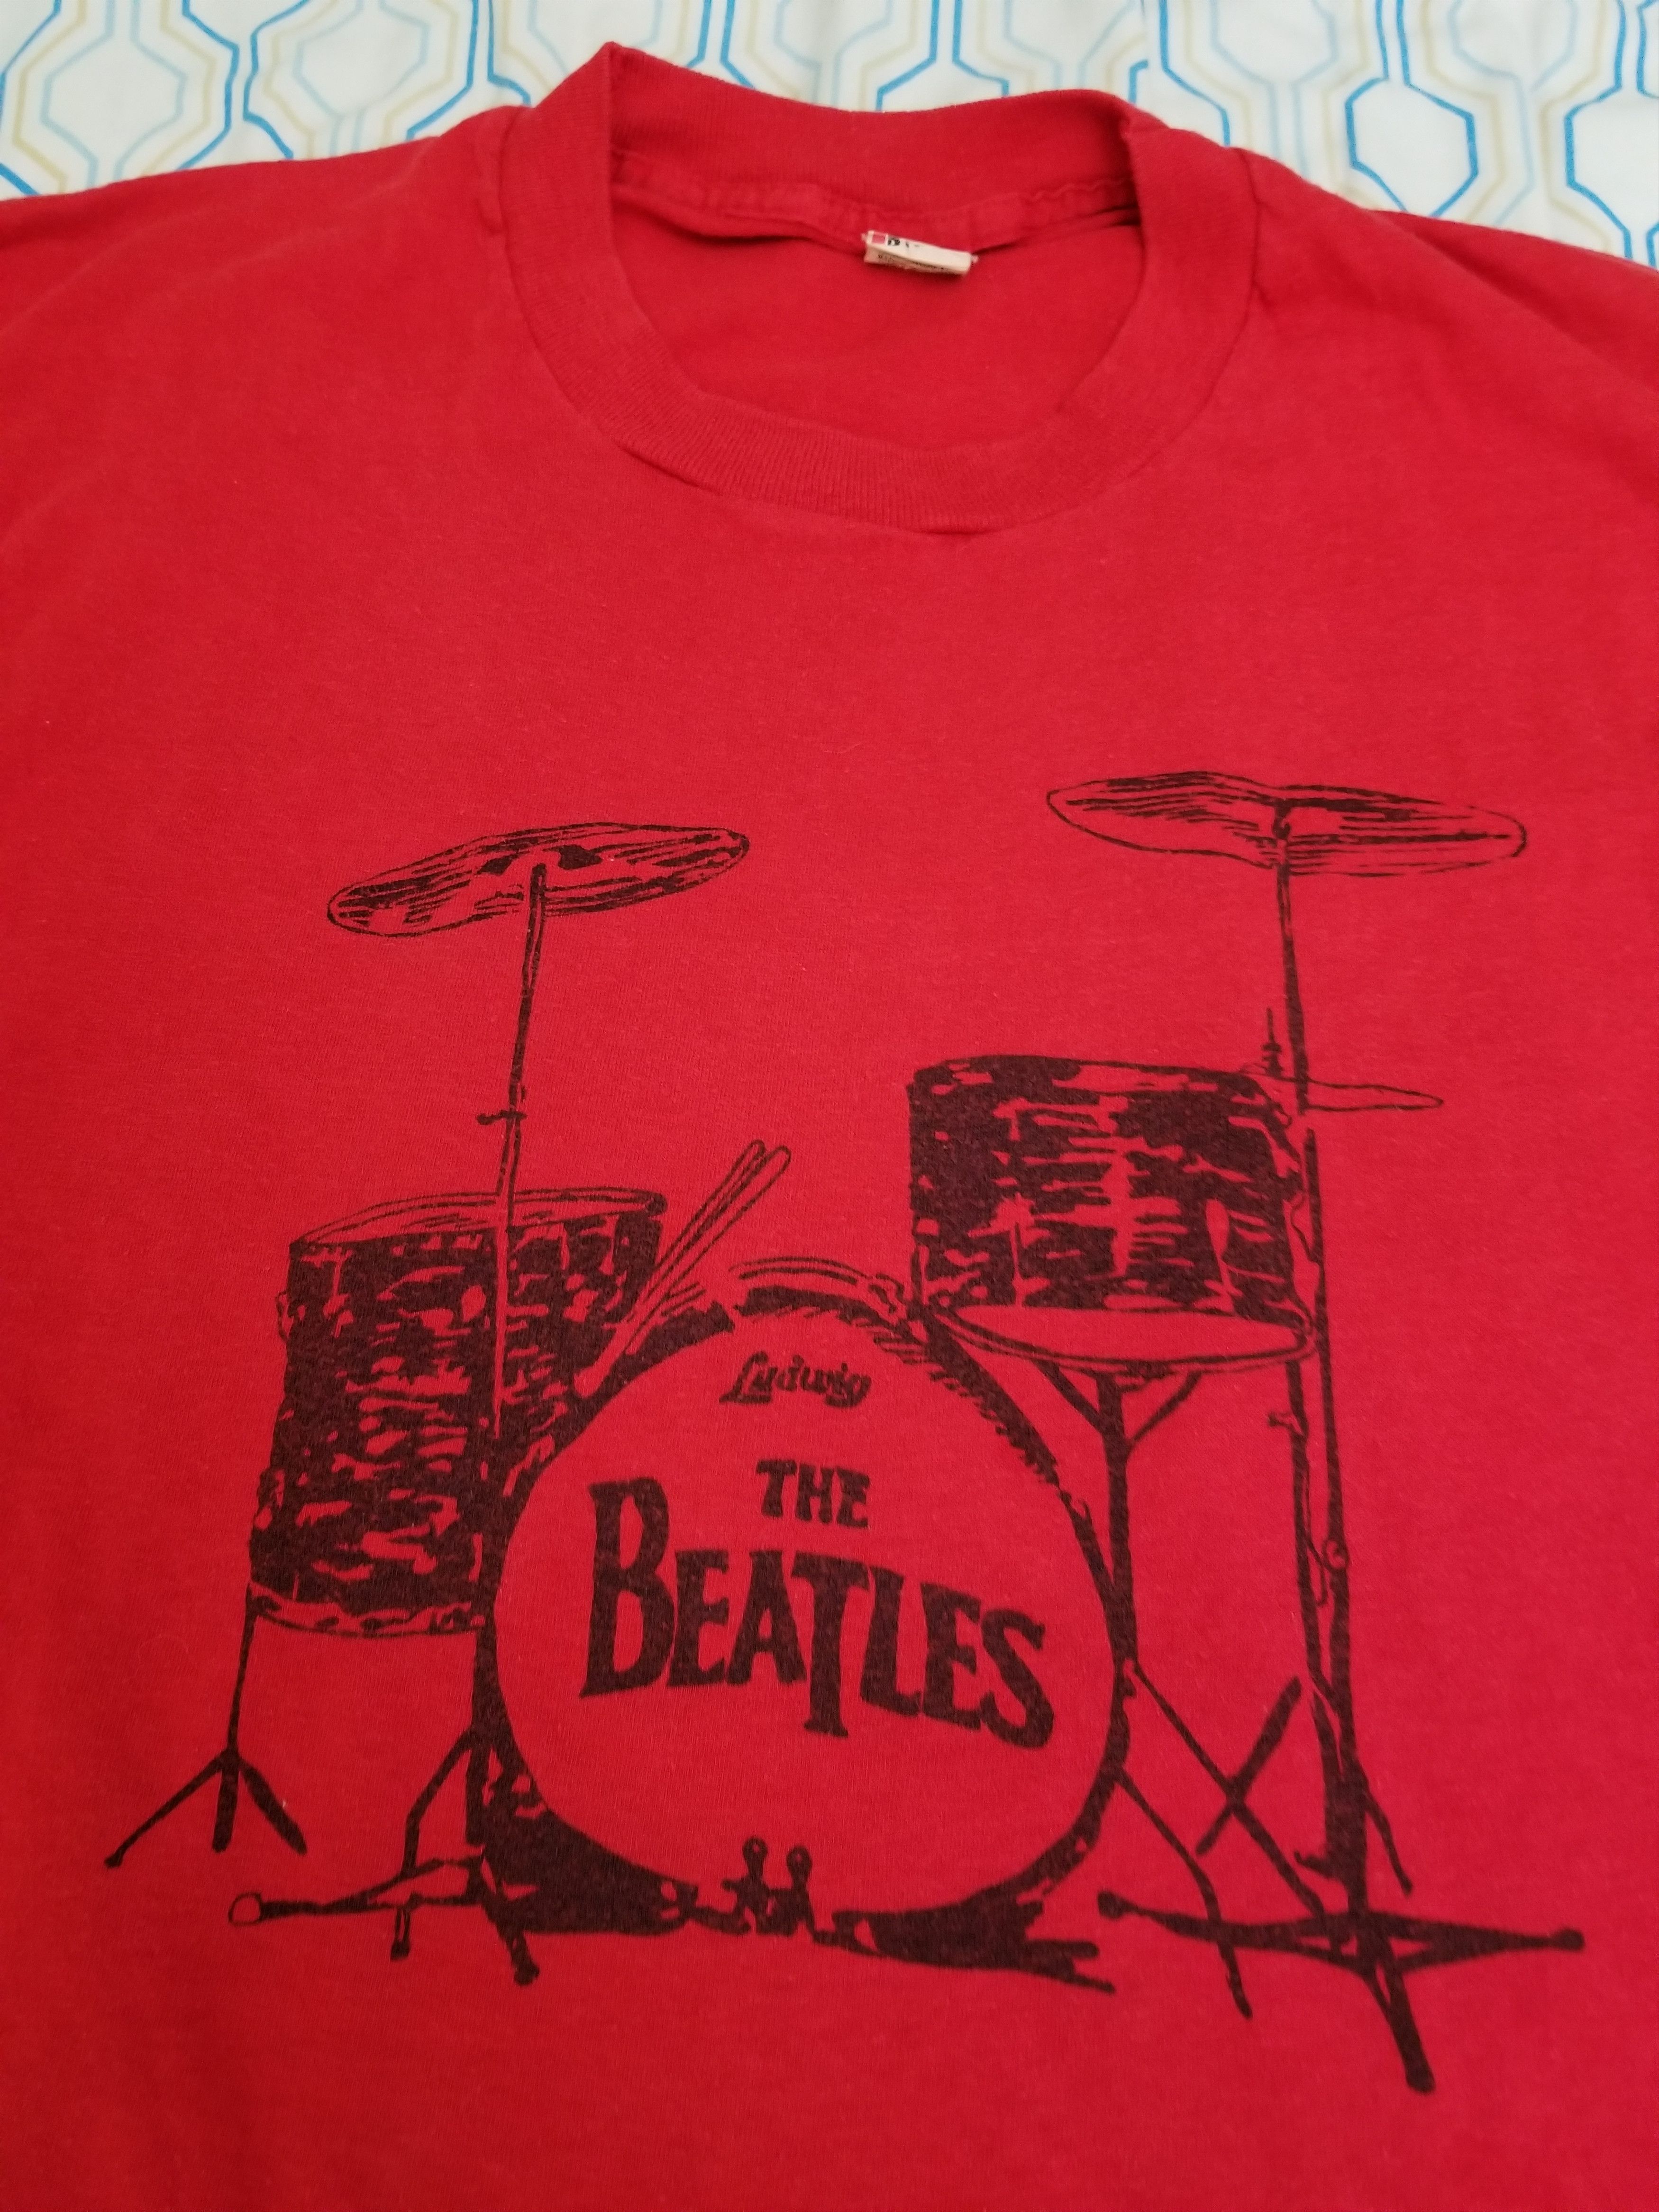 Vintage Vintage 80s The Beatles Drums T Shirt Ludwig Band Red Size US M / EU 48-50 / 2 - 1 Preview